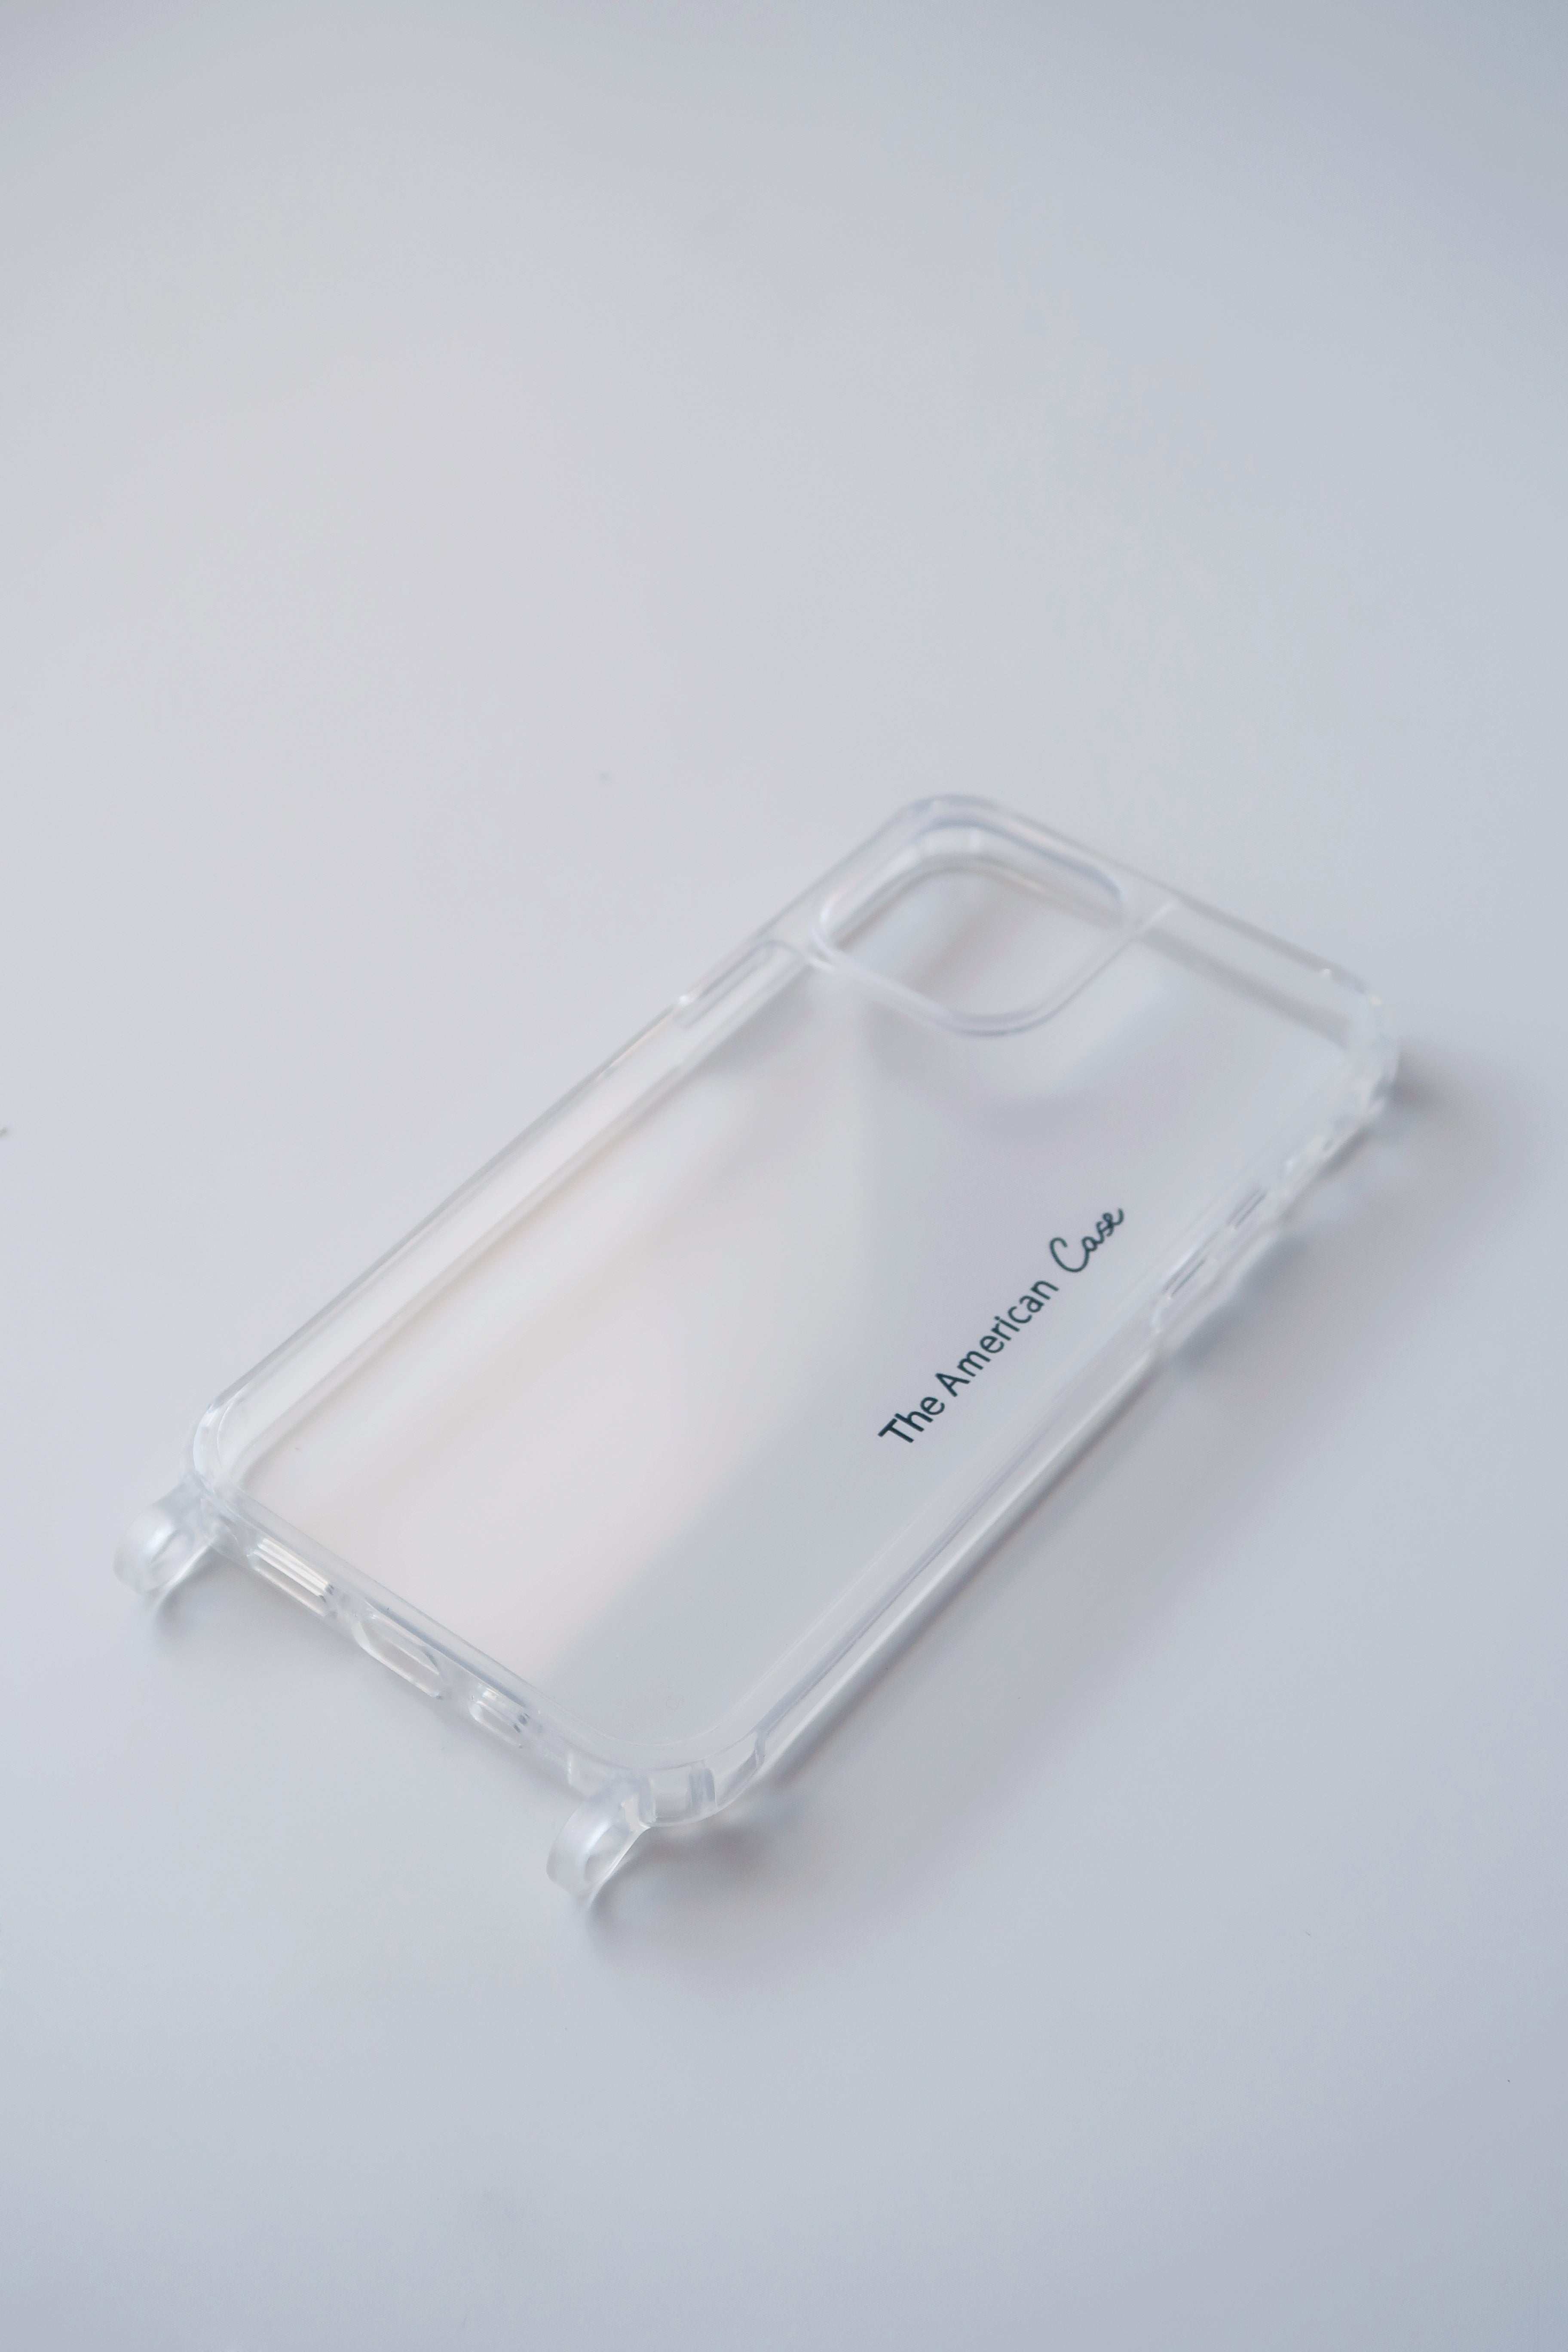 an angle view of a clear silicon phone case with two silicon rings with The American Case logo. The case features precise cutouts for buttons, speakers, and camera lenses, allowing full access to the phone's features. It can be easily attached to phone chains with carabiners for added convenience.